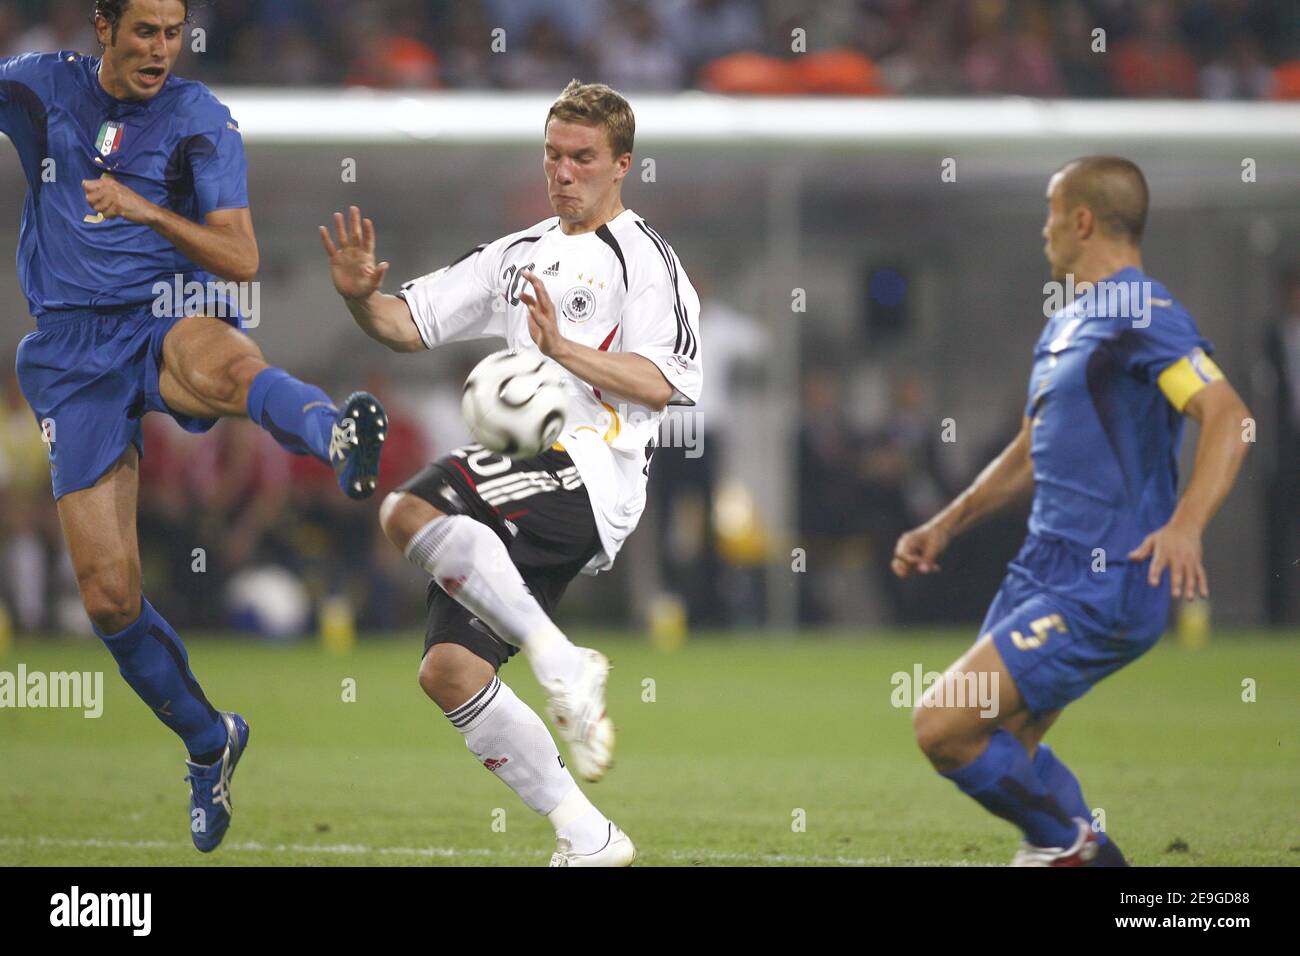 Germany's Sebastian Kehl in action during the World Cup 2006, semifinals, Italy vs Germany at the Signal Iduna Park stadium in Dortmund, Germany on July 4, 2006. Italy won 2-0. Photo by Christian Liewig/ABACAPRESS.COM Stock Photo